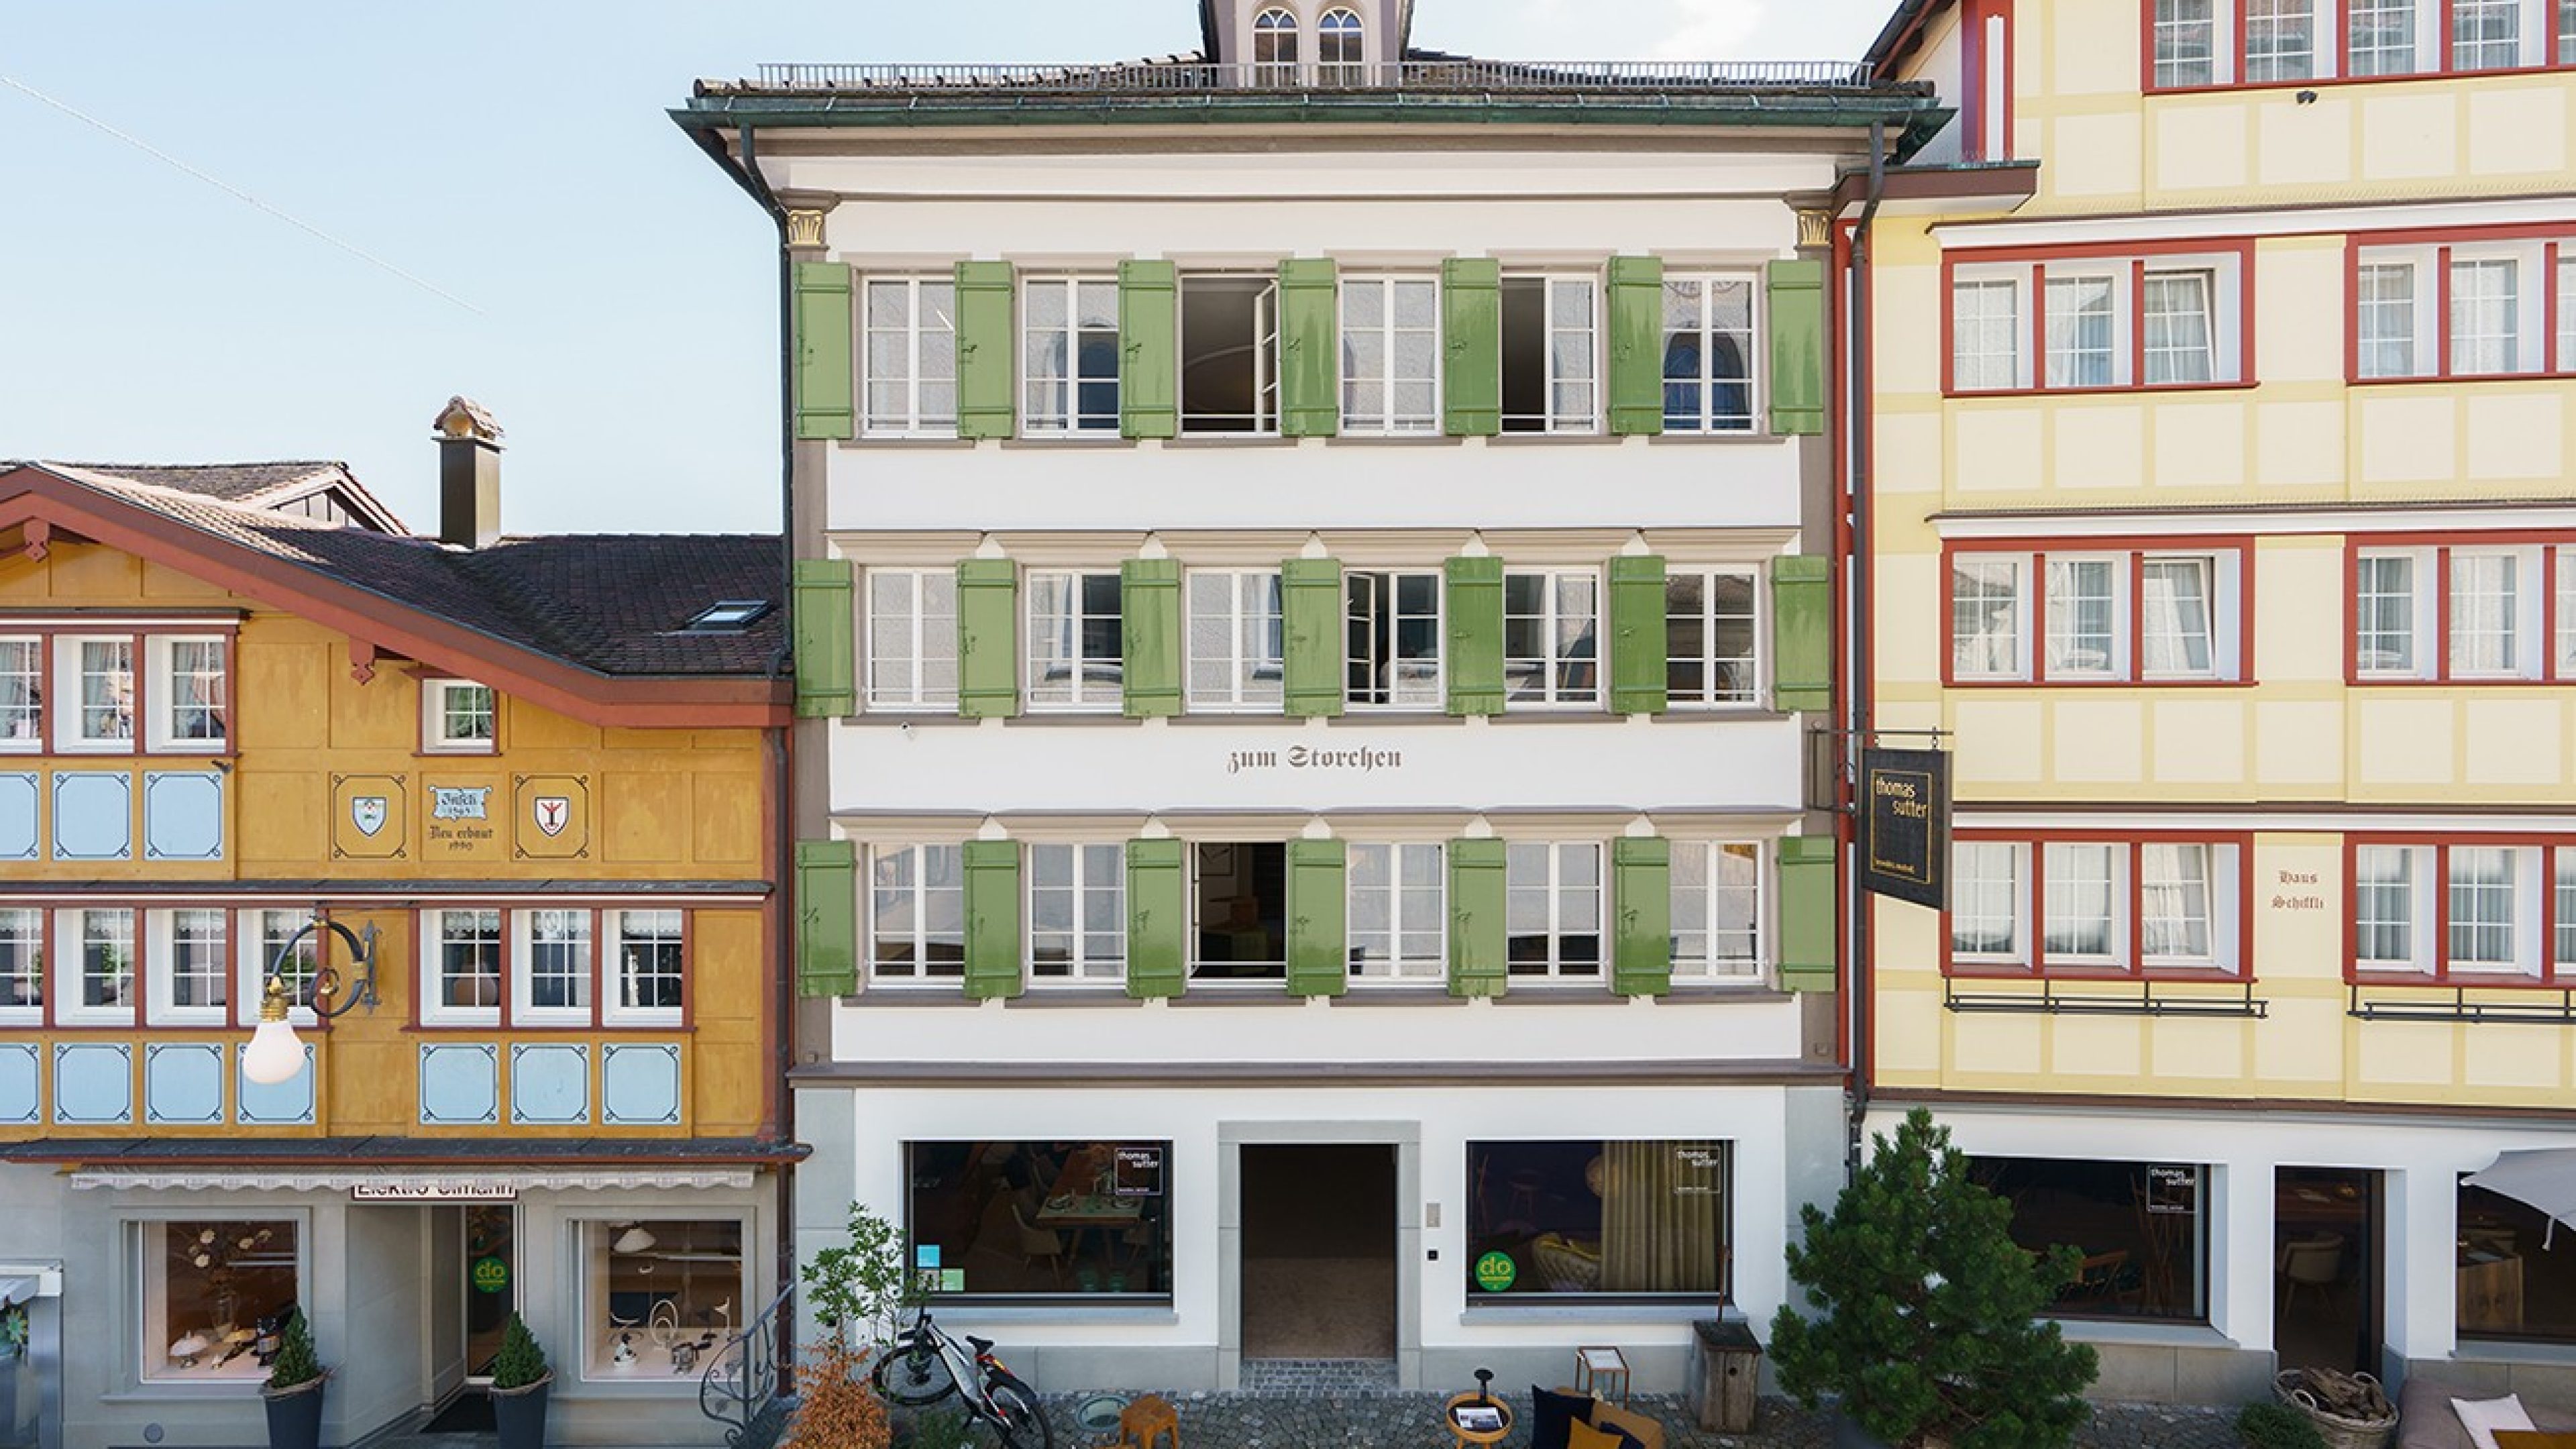 A row of houses in Appenzell